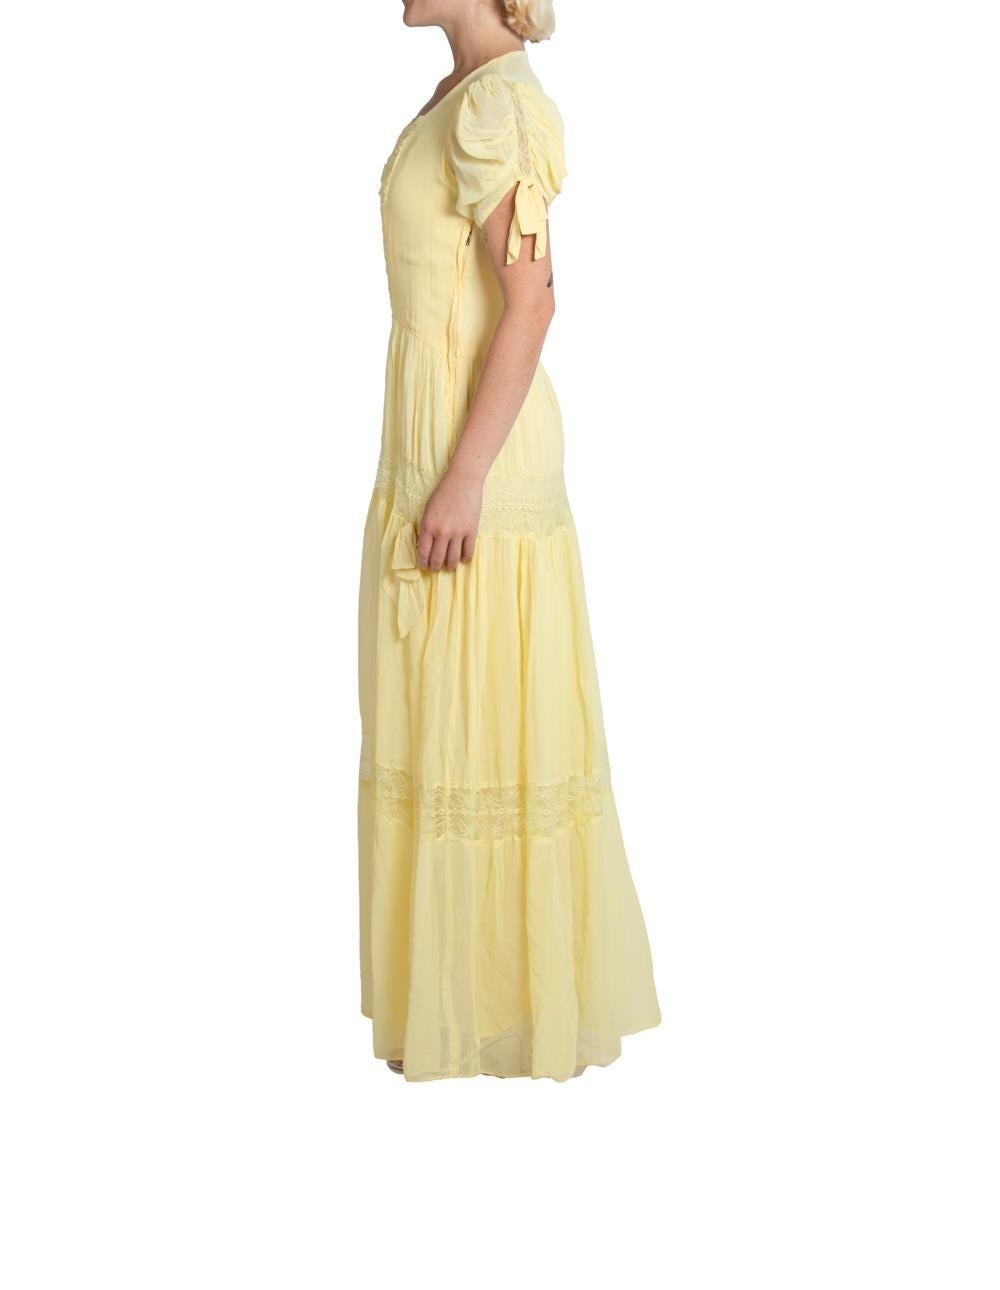 Women's 1940S Yellow Chiffon Gown With Tiers Of Lace Trim For Sale